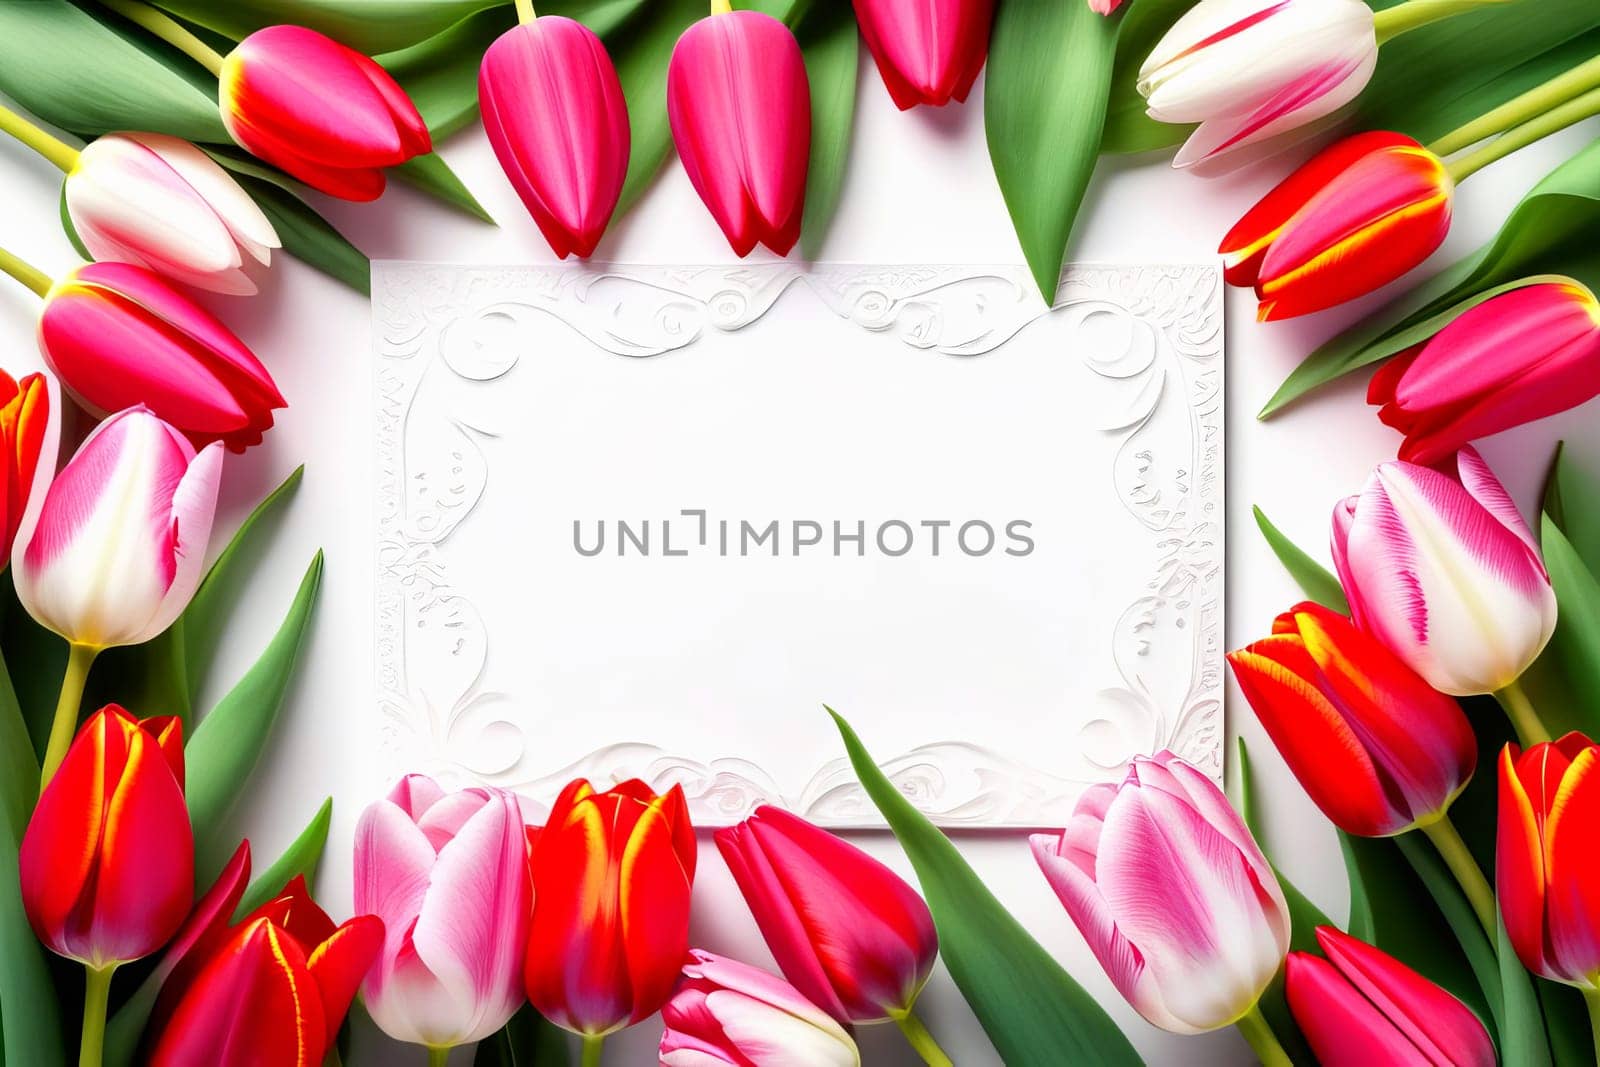 Women's Day card with copy space for text in a frame of pink and red tulips.